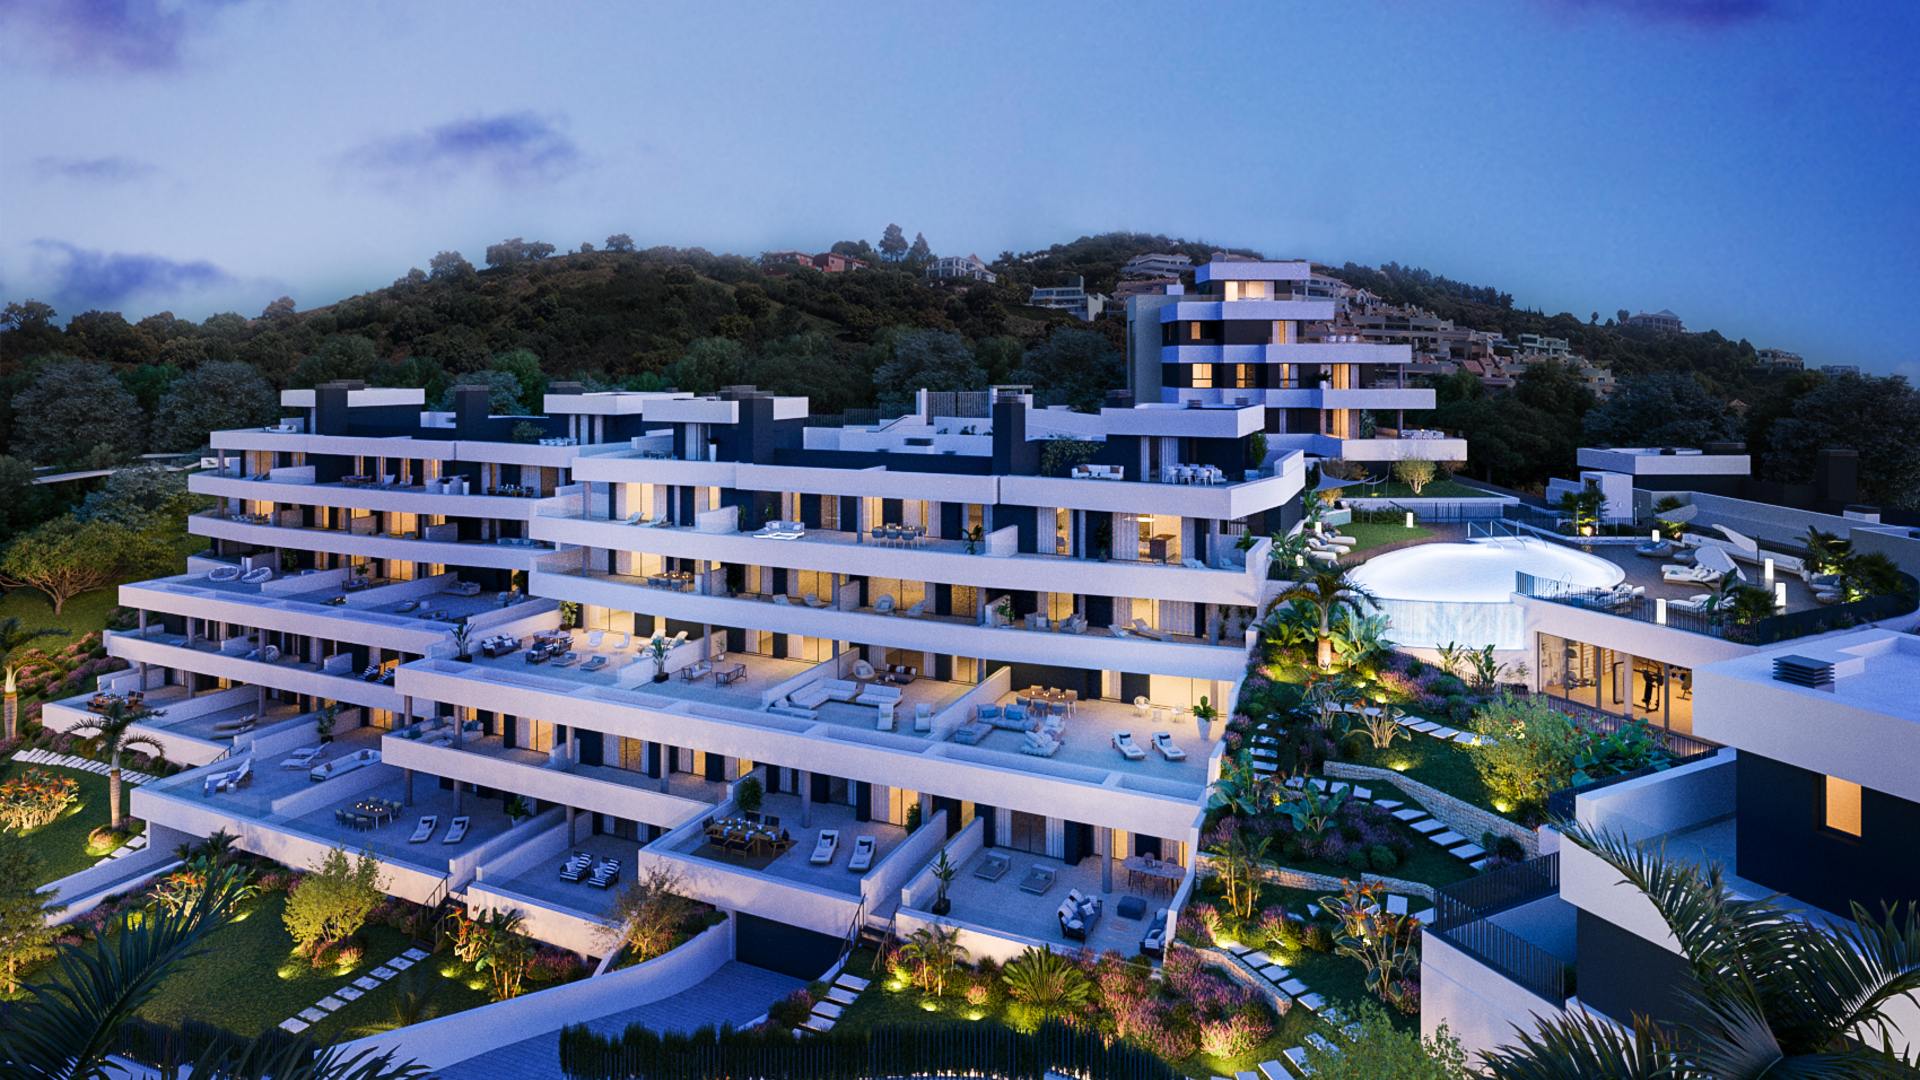 Design apartments on the outskirts of Marbella